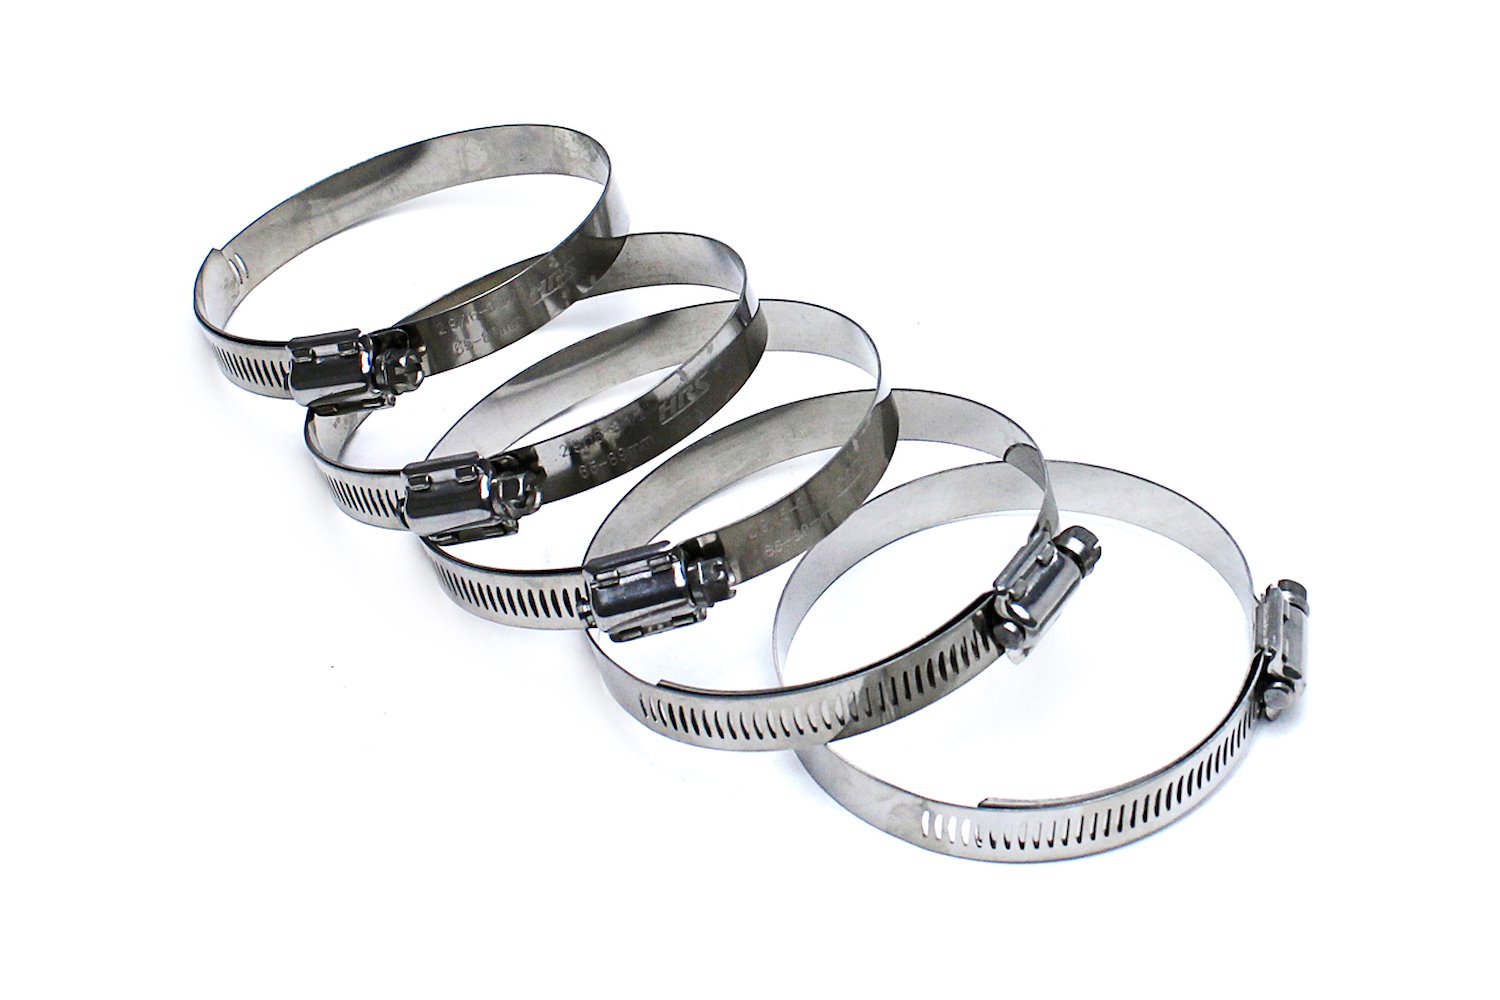 SSWC-84-108x5 Stainless Steel Worm Gear Hose Clamp, Effective Range: 3-5/16 in.- 4-1/4 in., 5Pc